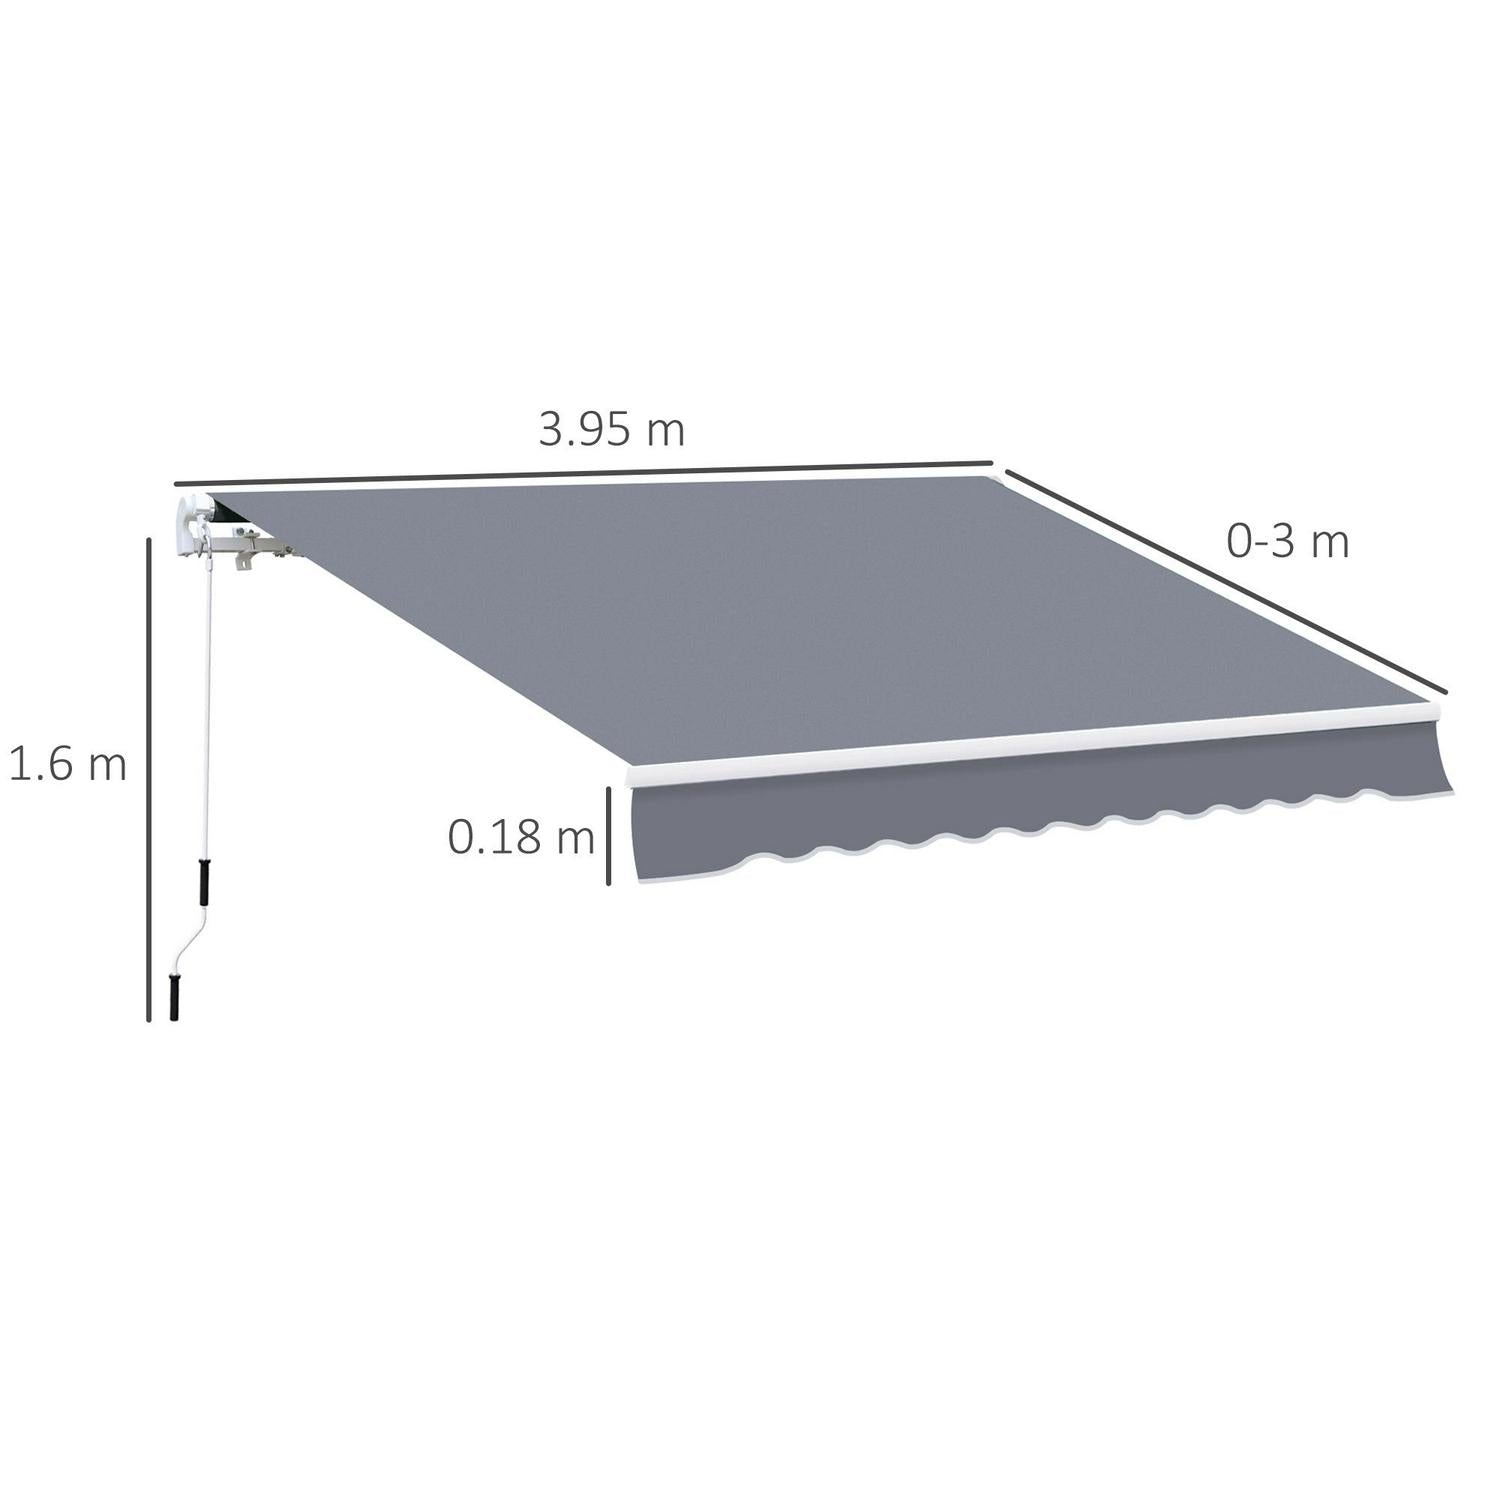 4 X3m Manual Retractable Awning, Size -Grey